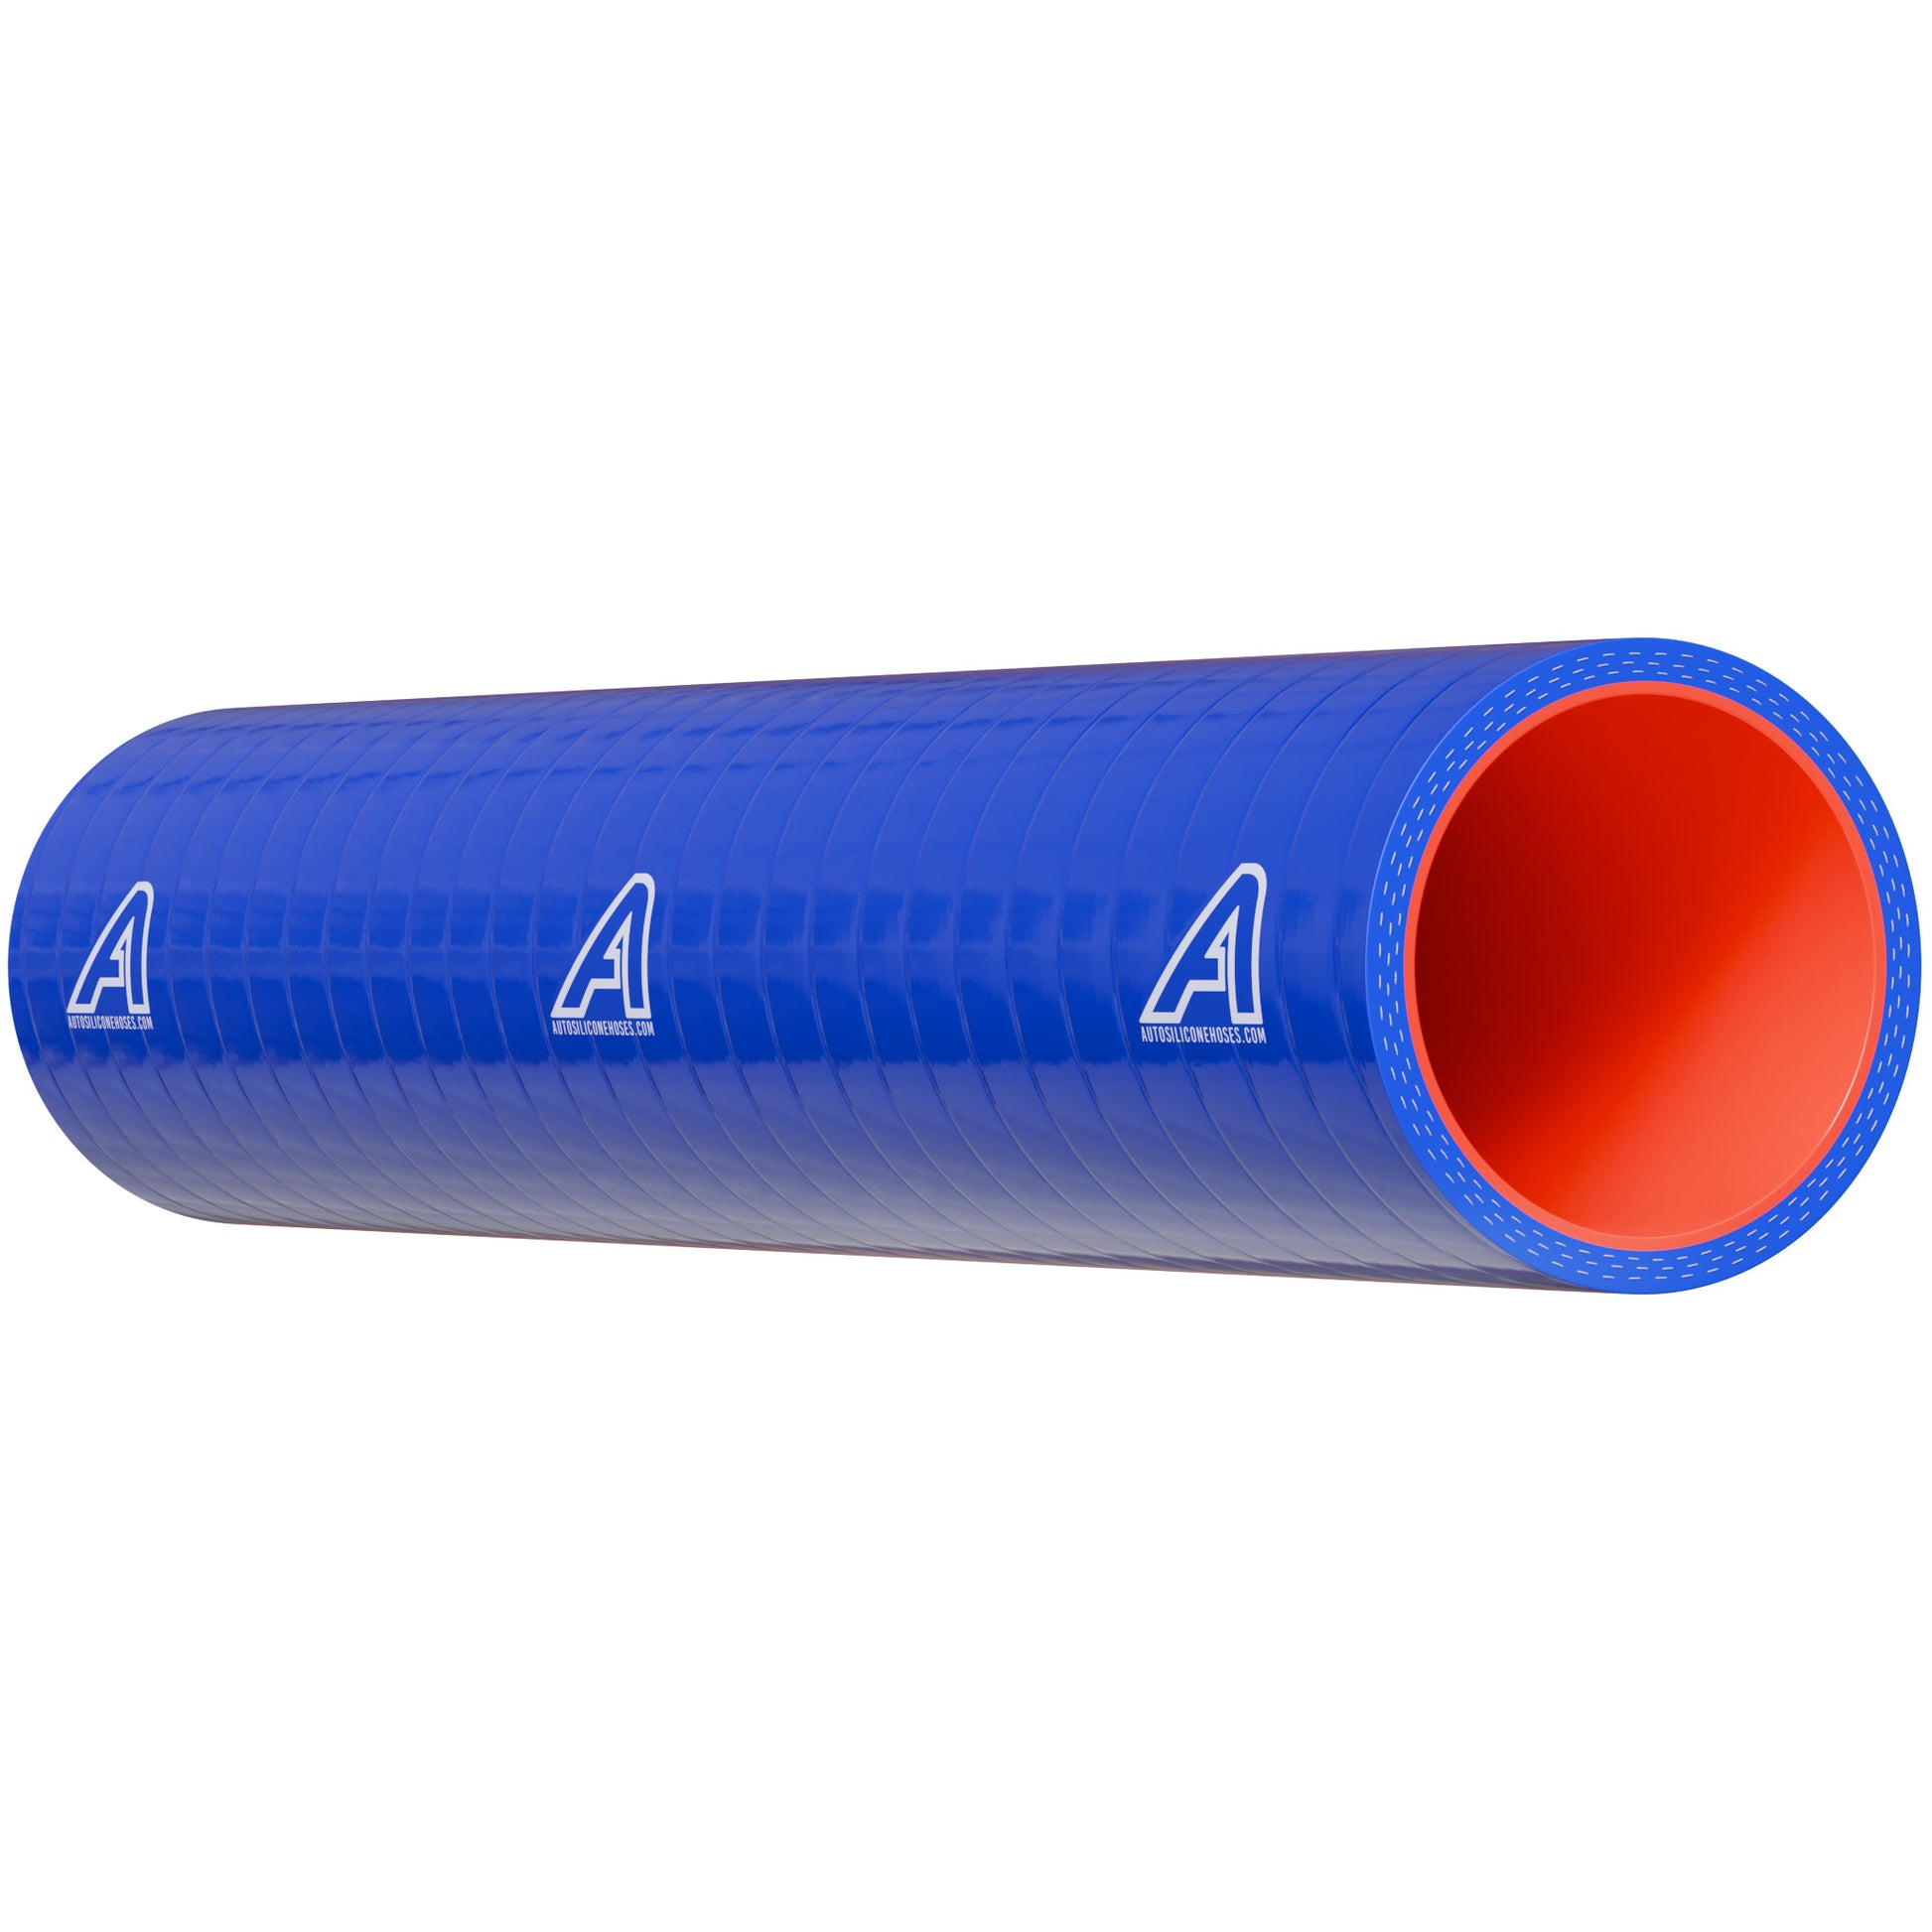 40mm ID Silicone Flouro Fuel & Oil Hose Joiner Motor Vehicle Engine Parts Auto Silicone Hoses   